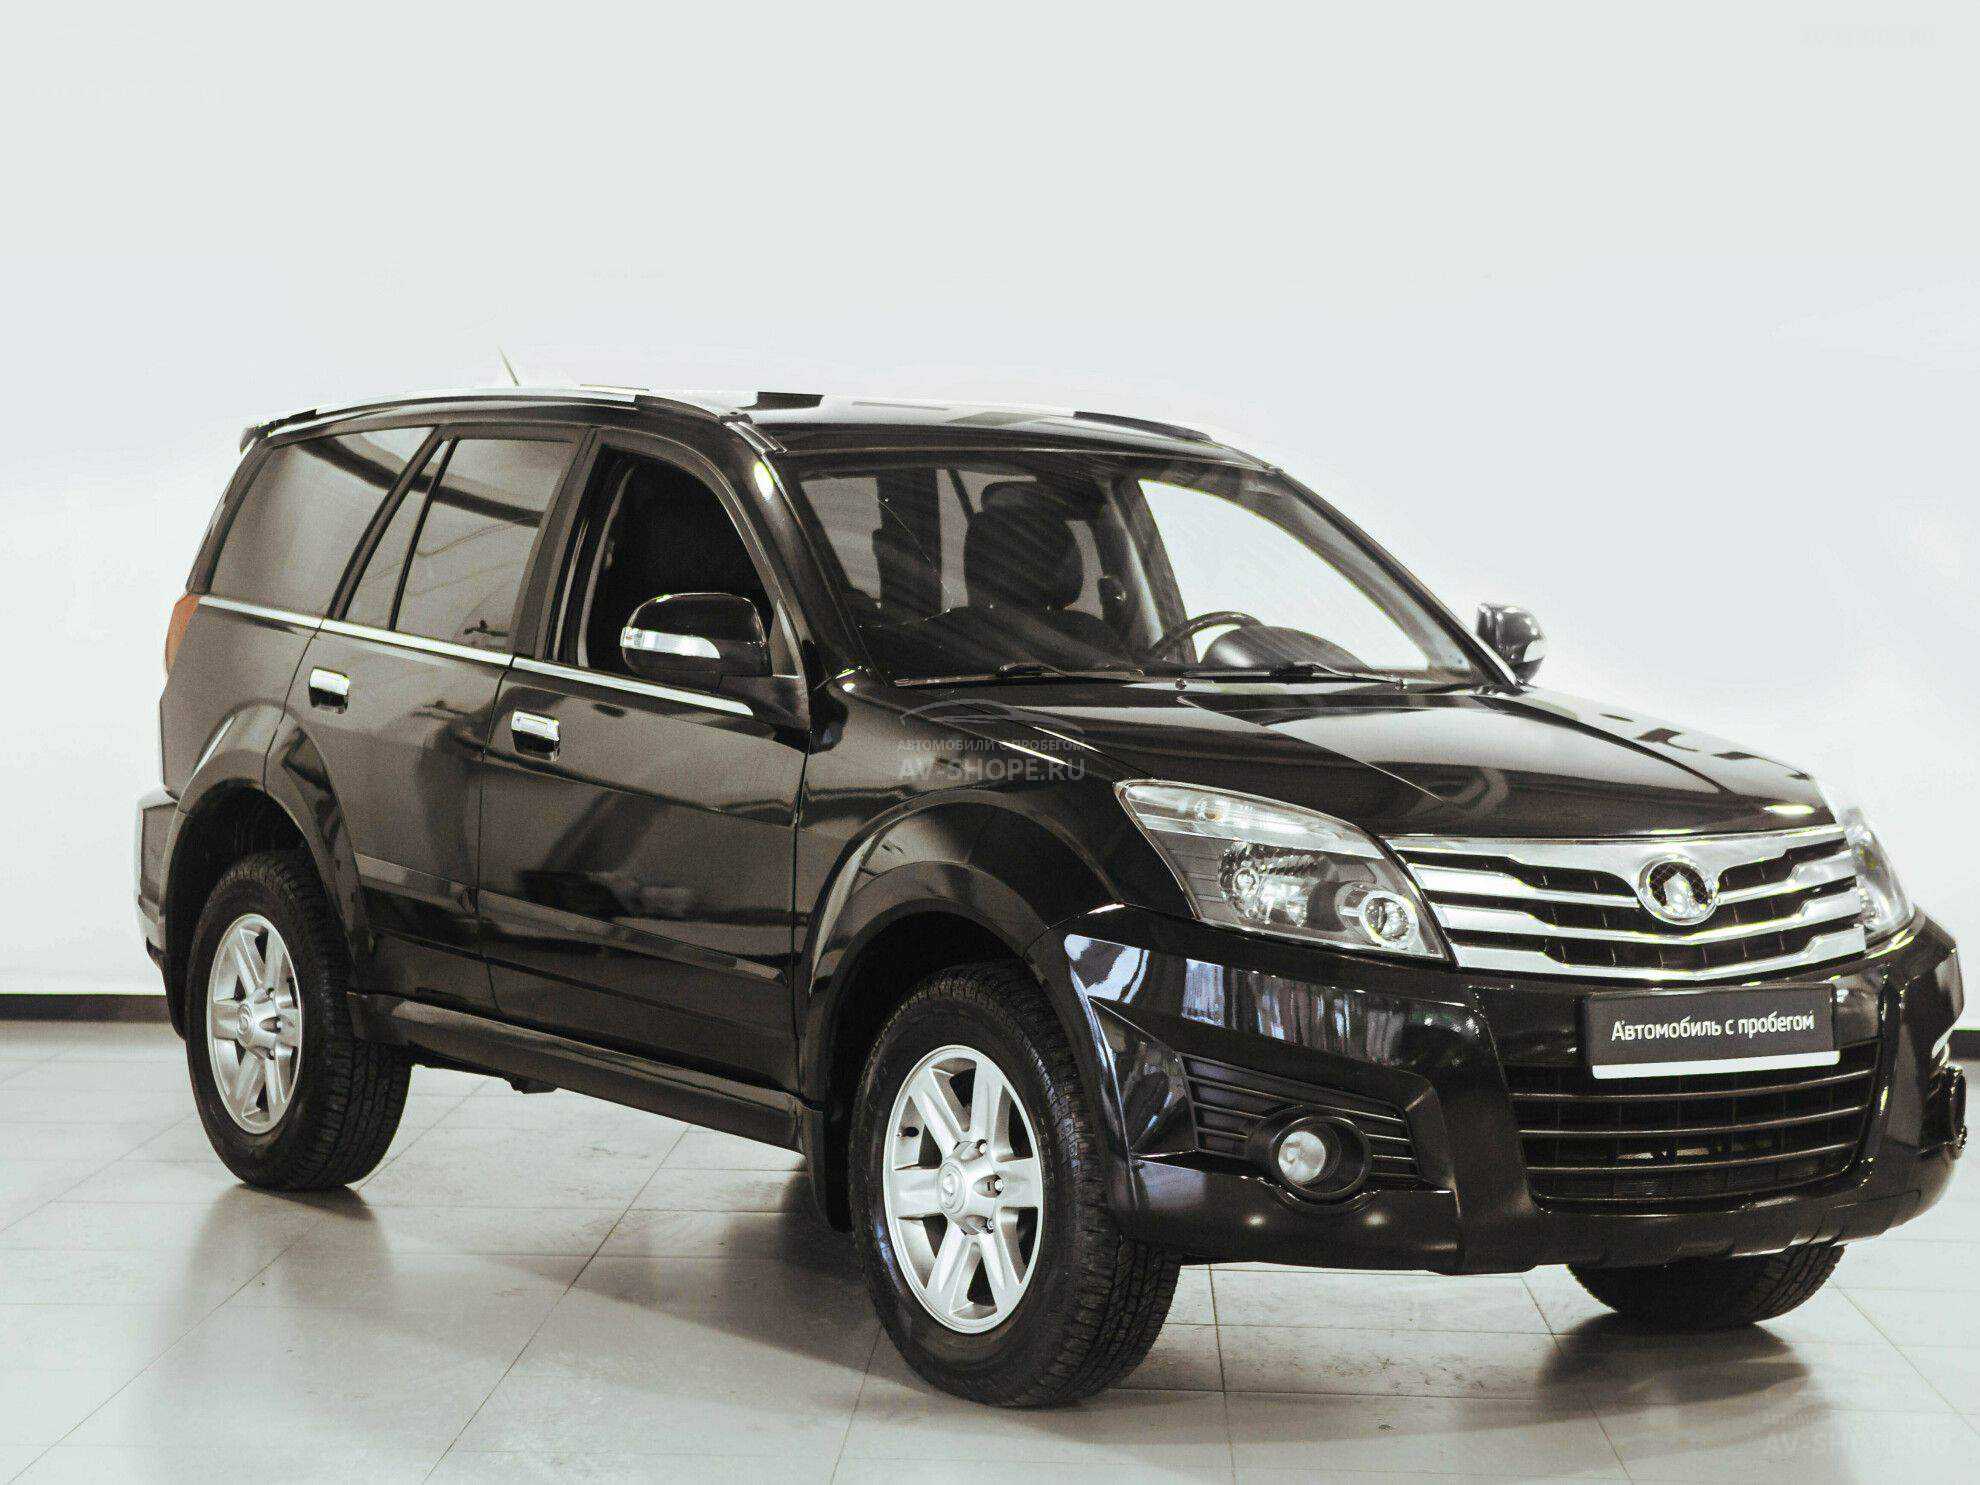 Ховер фото цена. Great Wall Hover h3. Great Wall Hover h3 2012. Great Wall Hover 2012. Great Wall Hover h1.